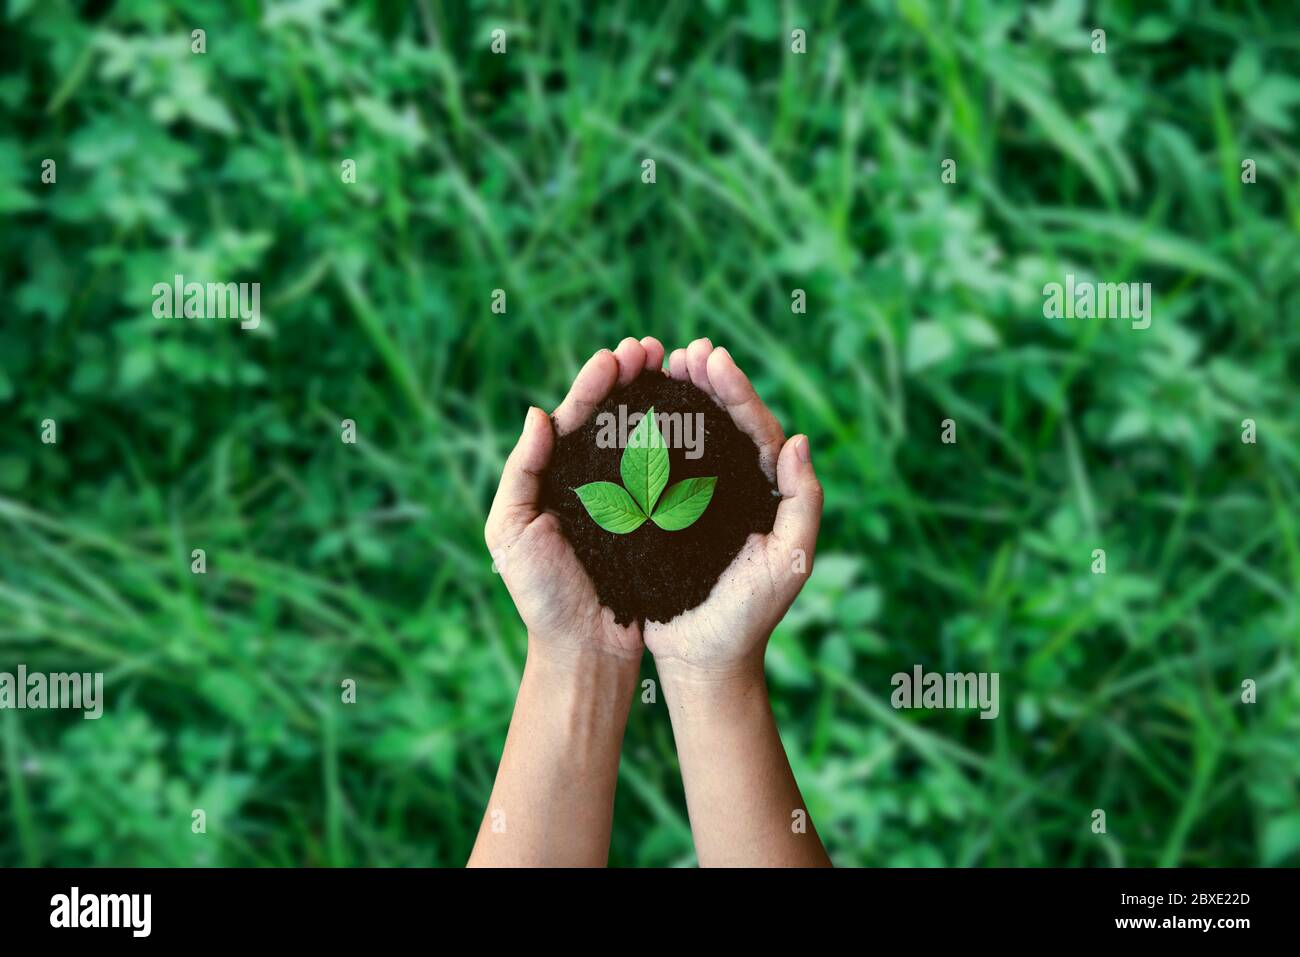 Top view hands holding tree growing on green meadow background. Saving environment and natural conservation concept with tree planing on green globe e Stock Photo